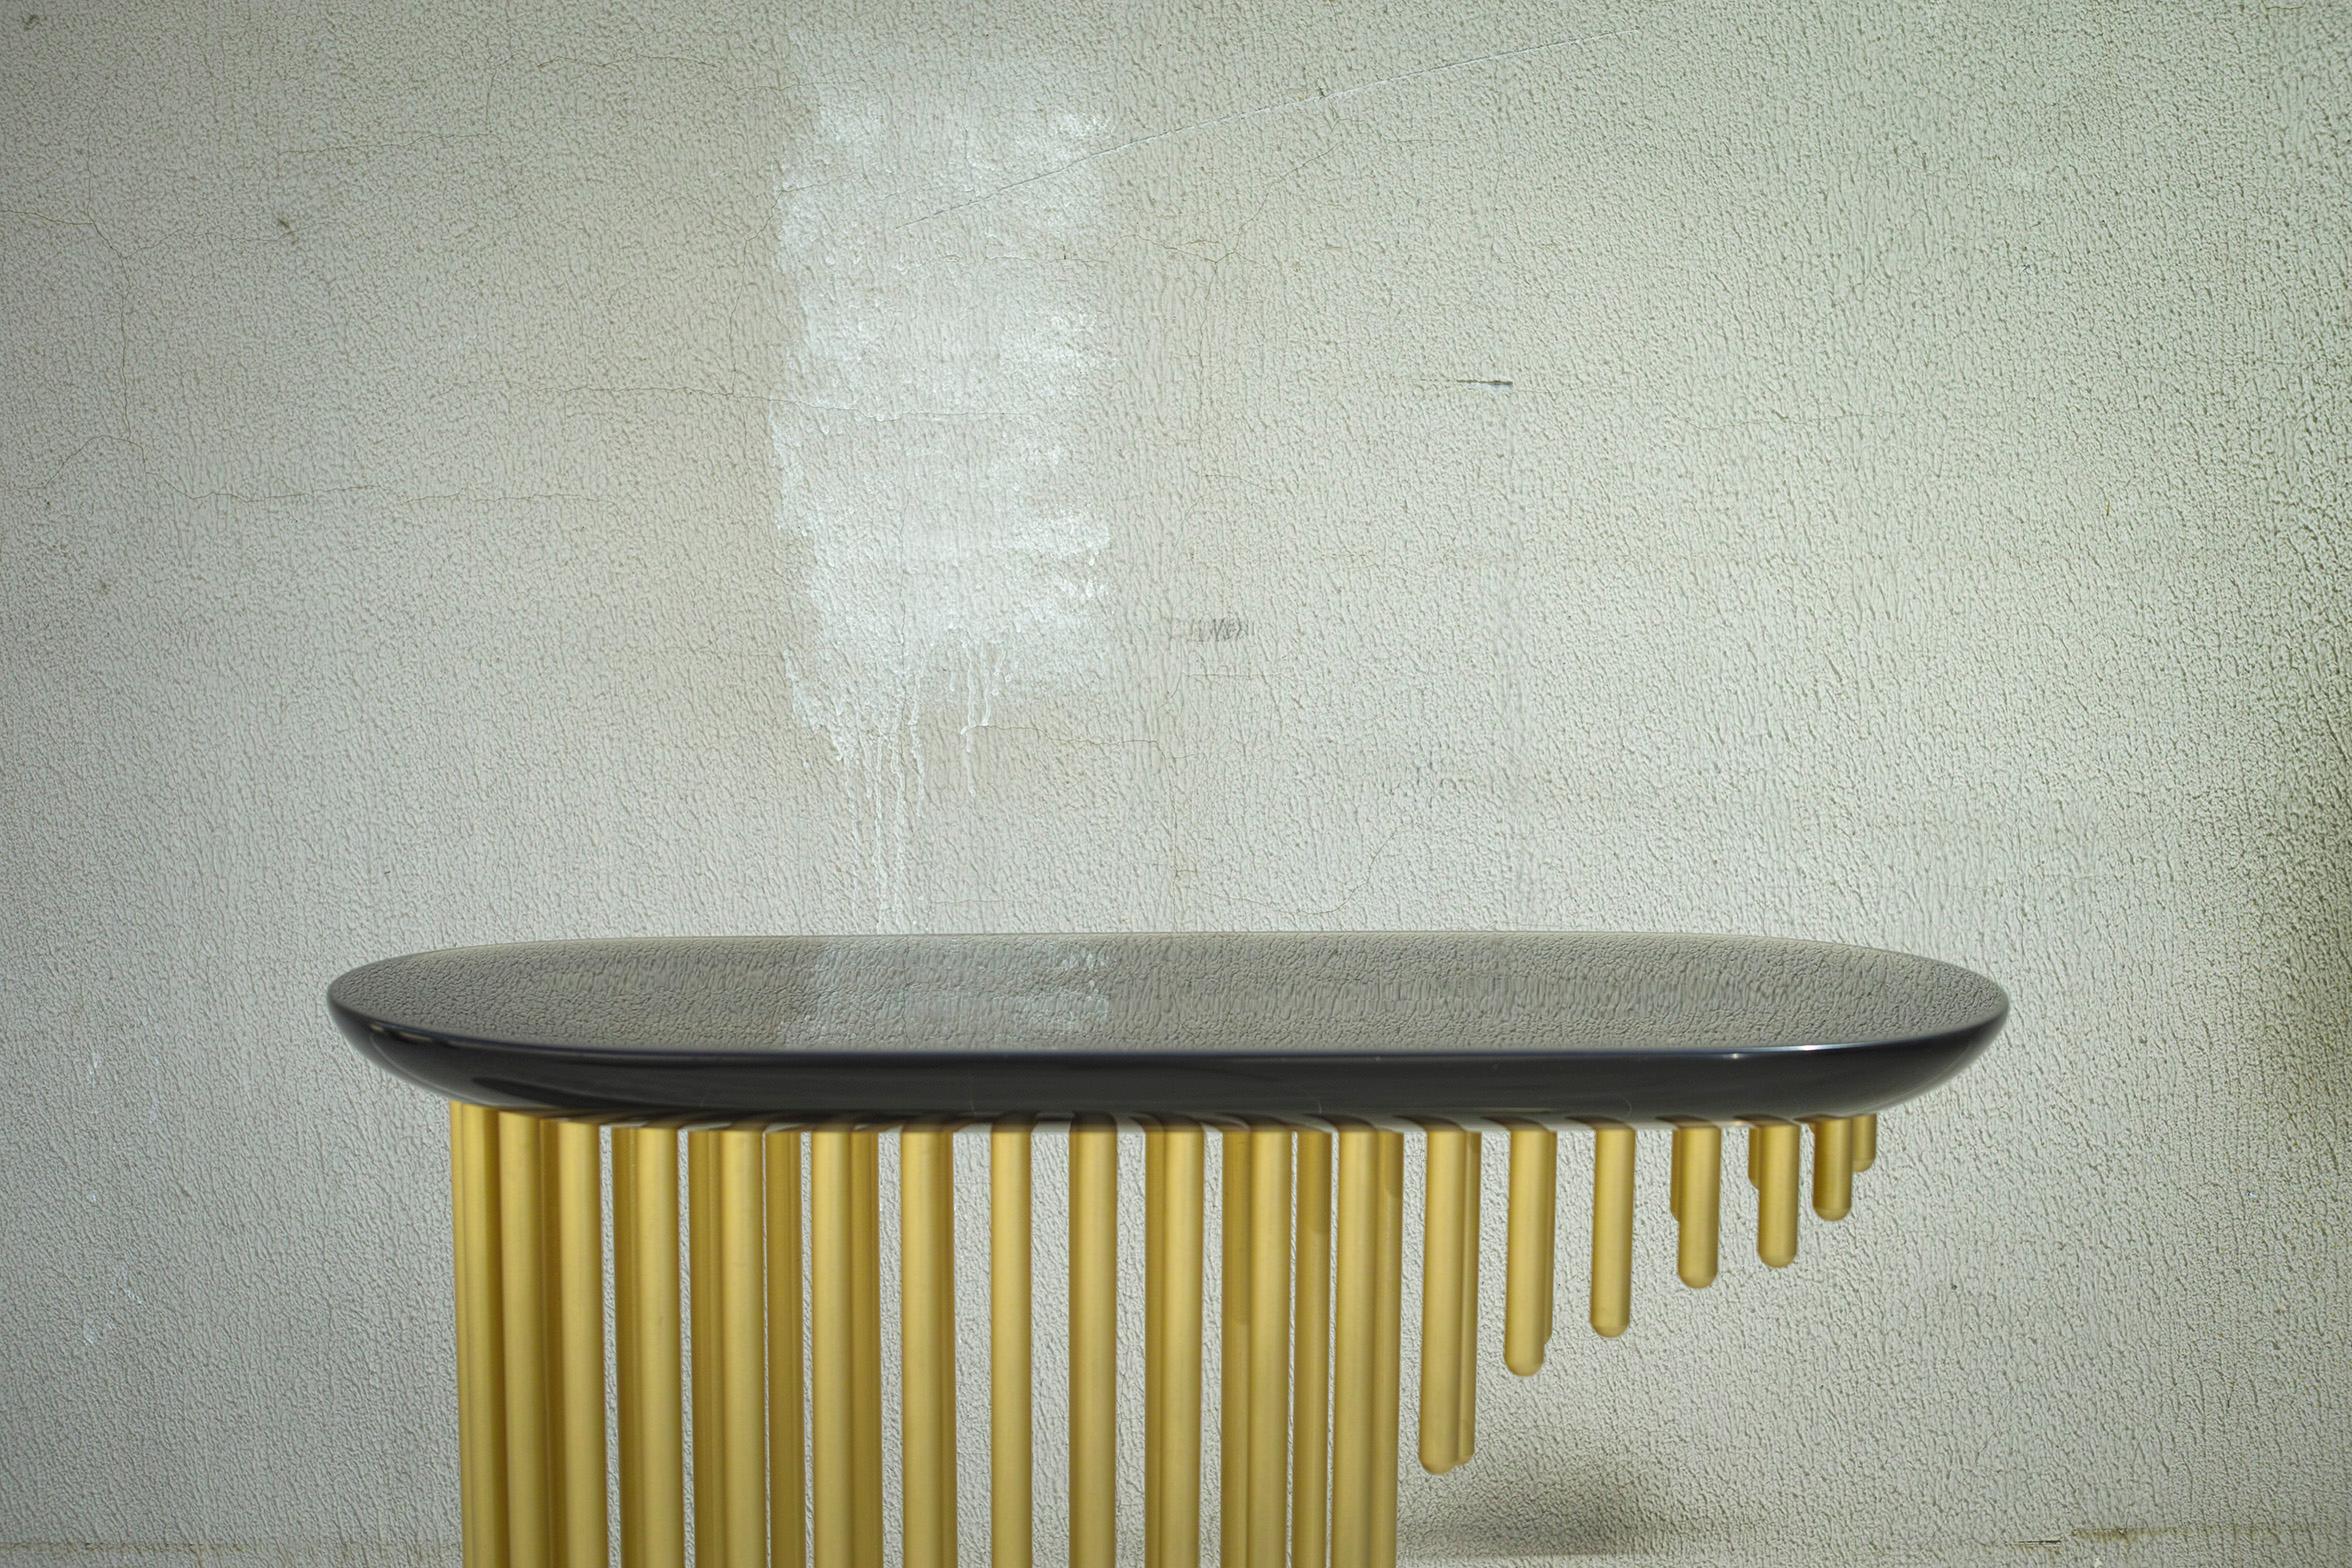 Charleston, Georges Mohasseb Design, 2018
Inspired by the 1920's era and the Art Deco opulent style, this unique console unit is made of refined brushed brass with a matte finish for the base and smoke grey resin cast for the top. This combination